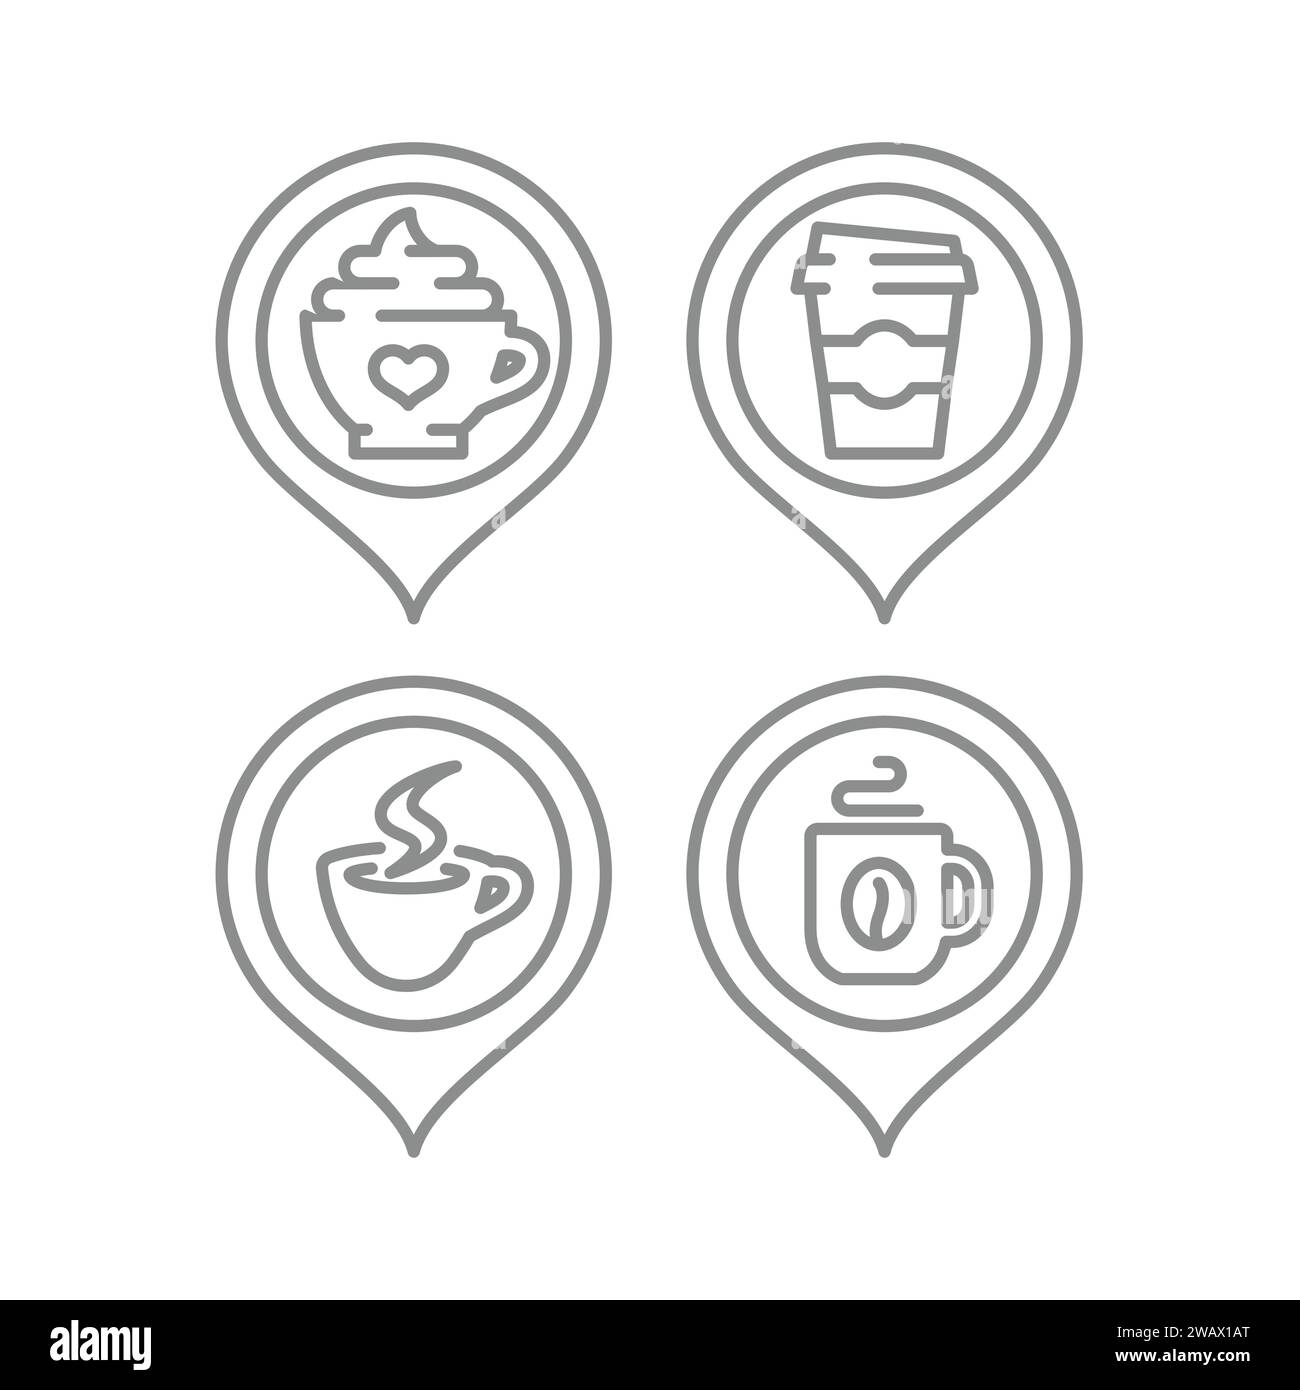 Cafe location map pin vector icons. Coffee cup to go place icon set. Editable stroke. Stock Vector